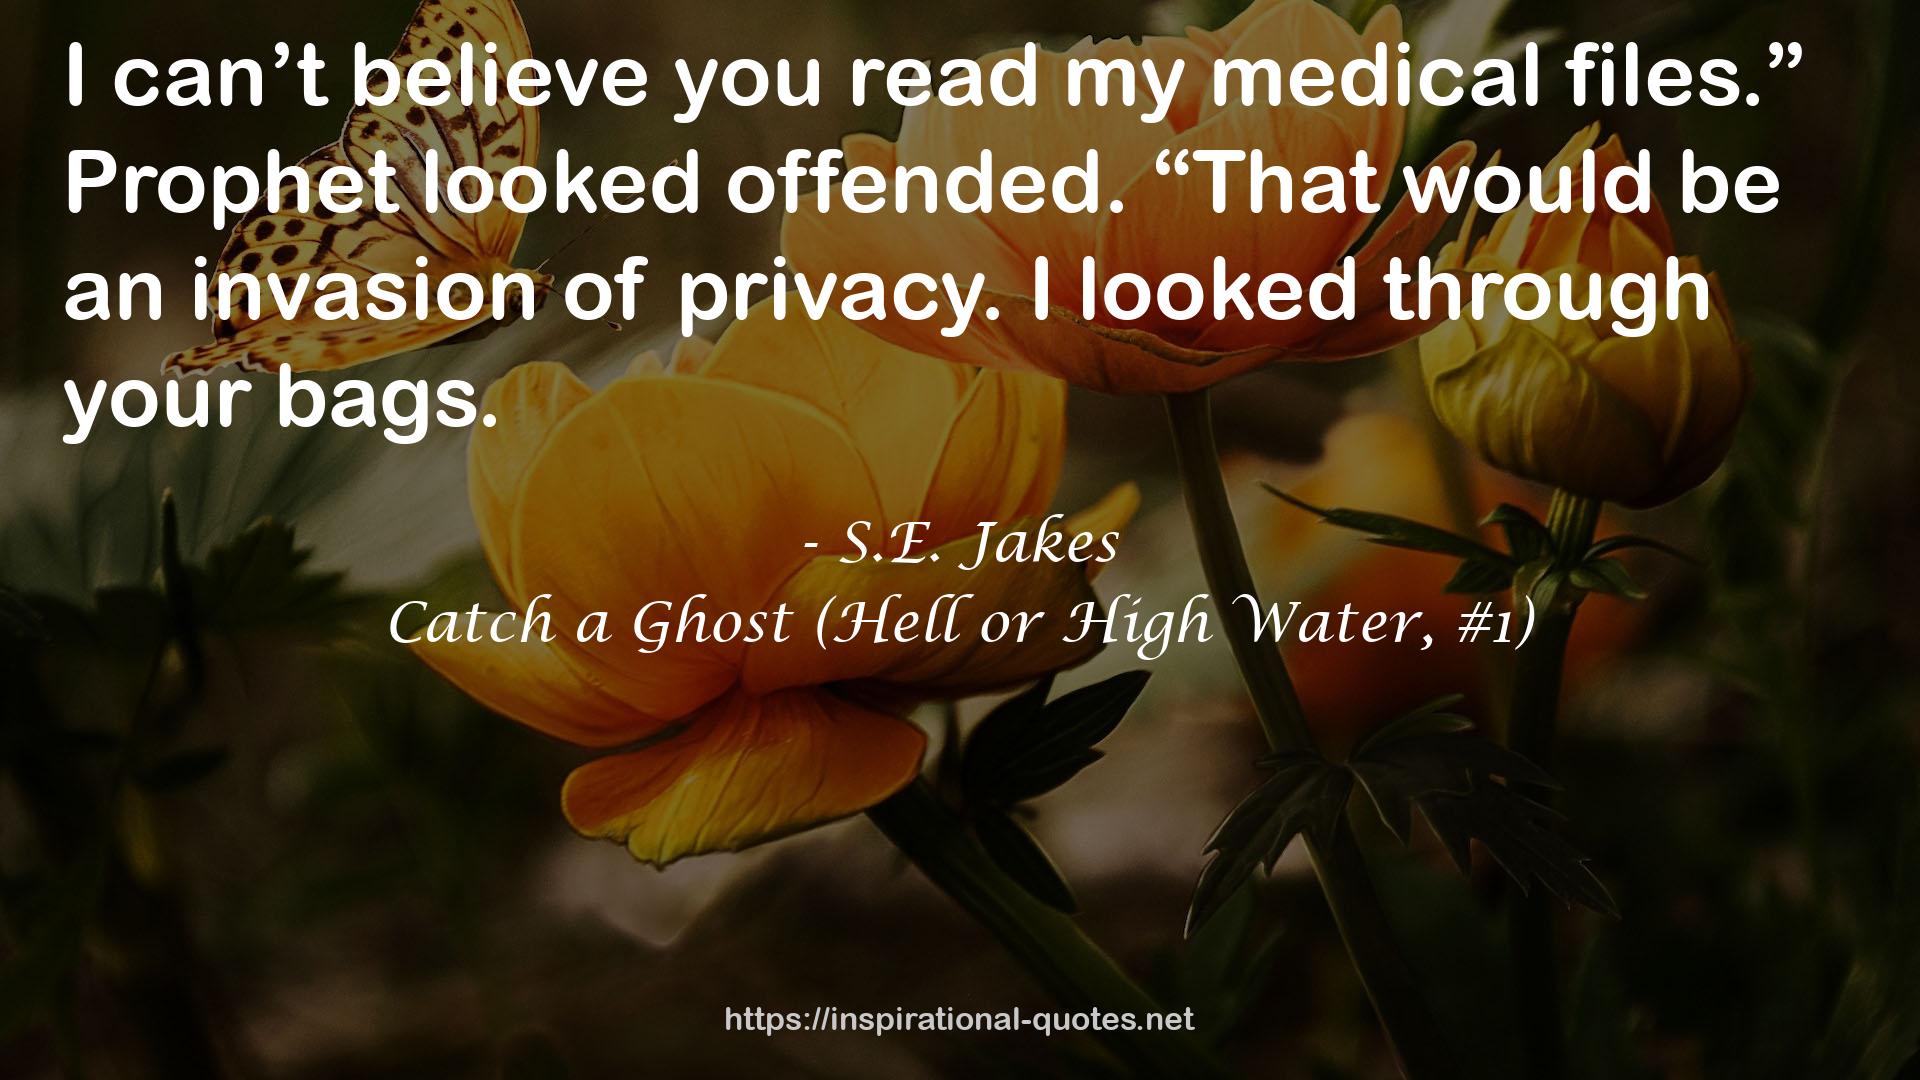 S.E. Jakes QUOTES